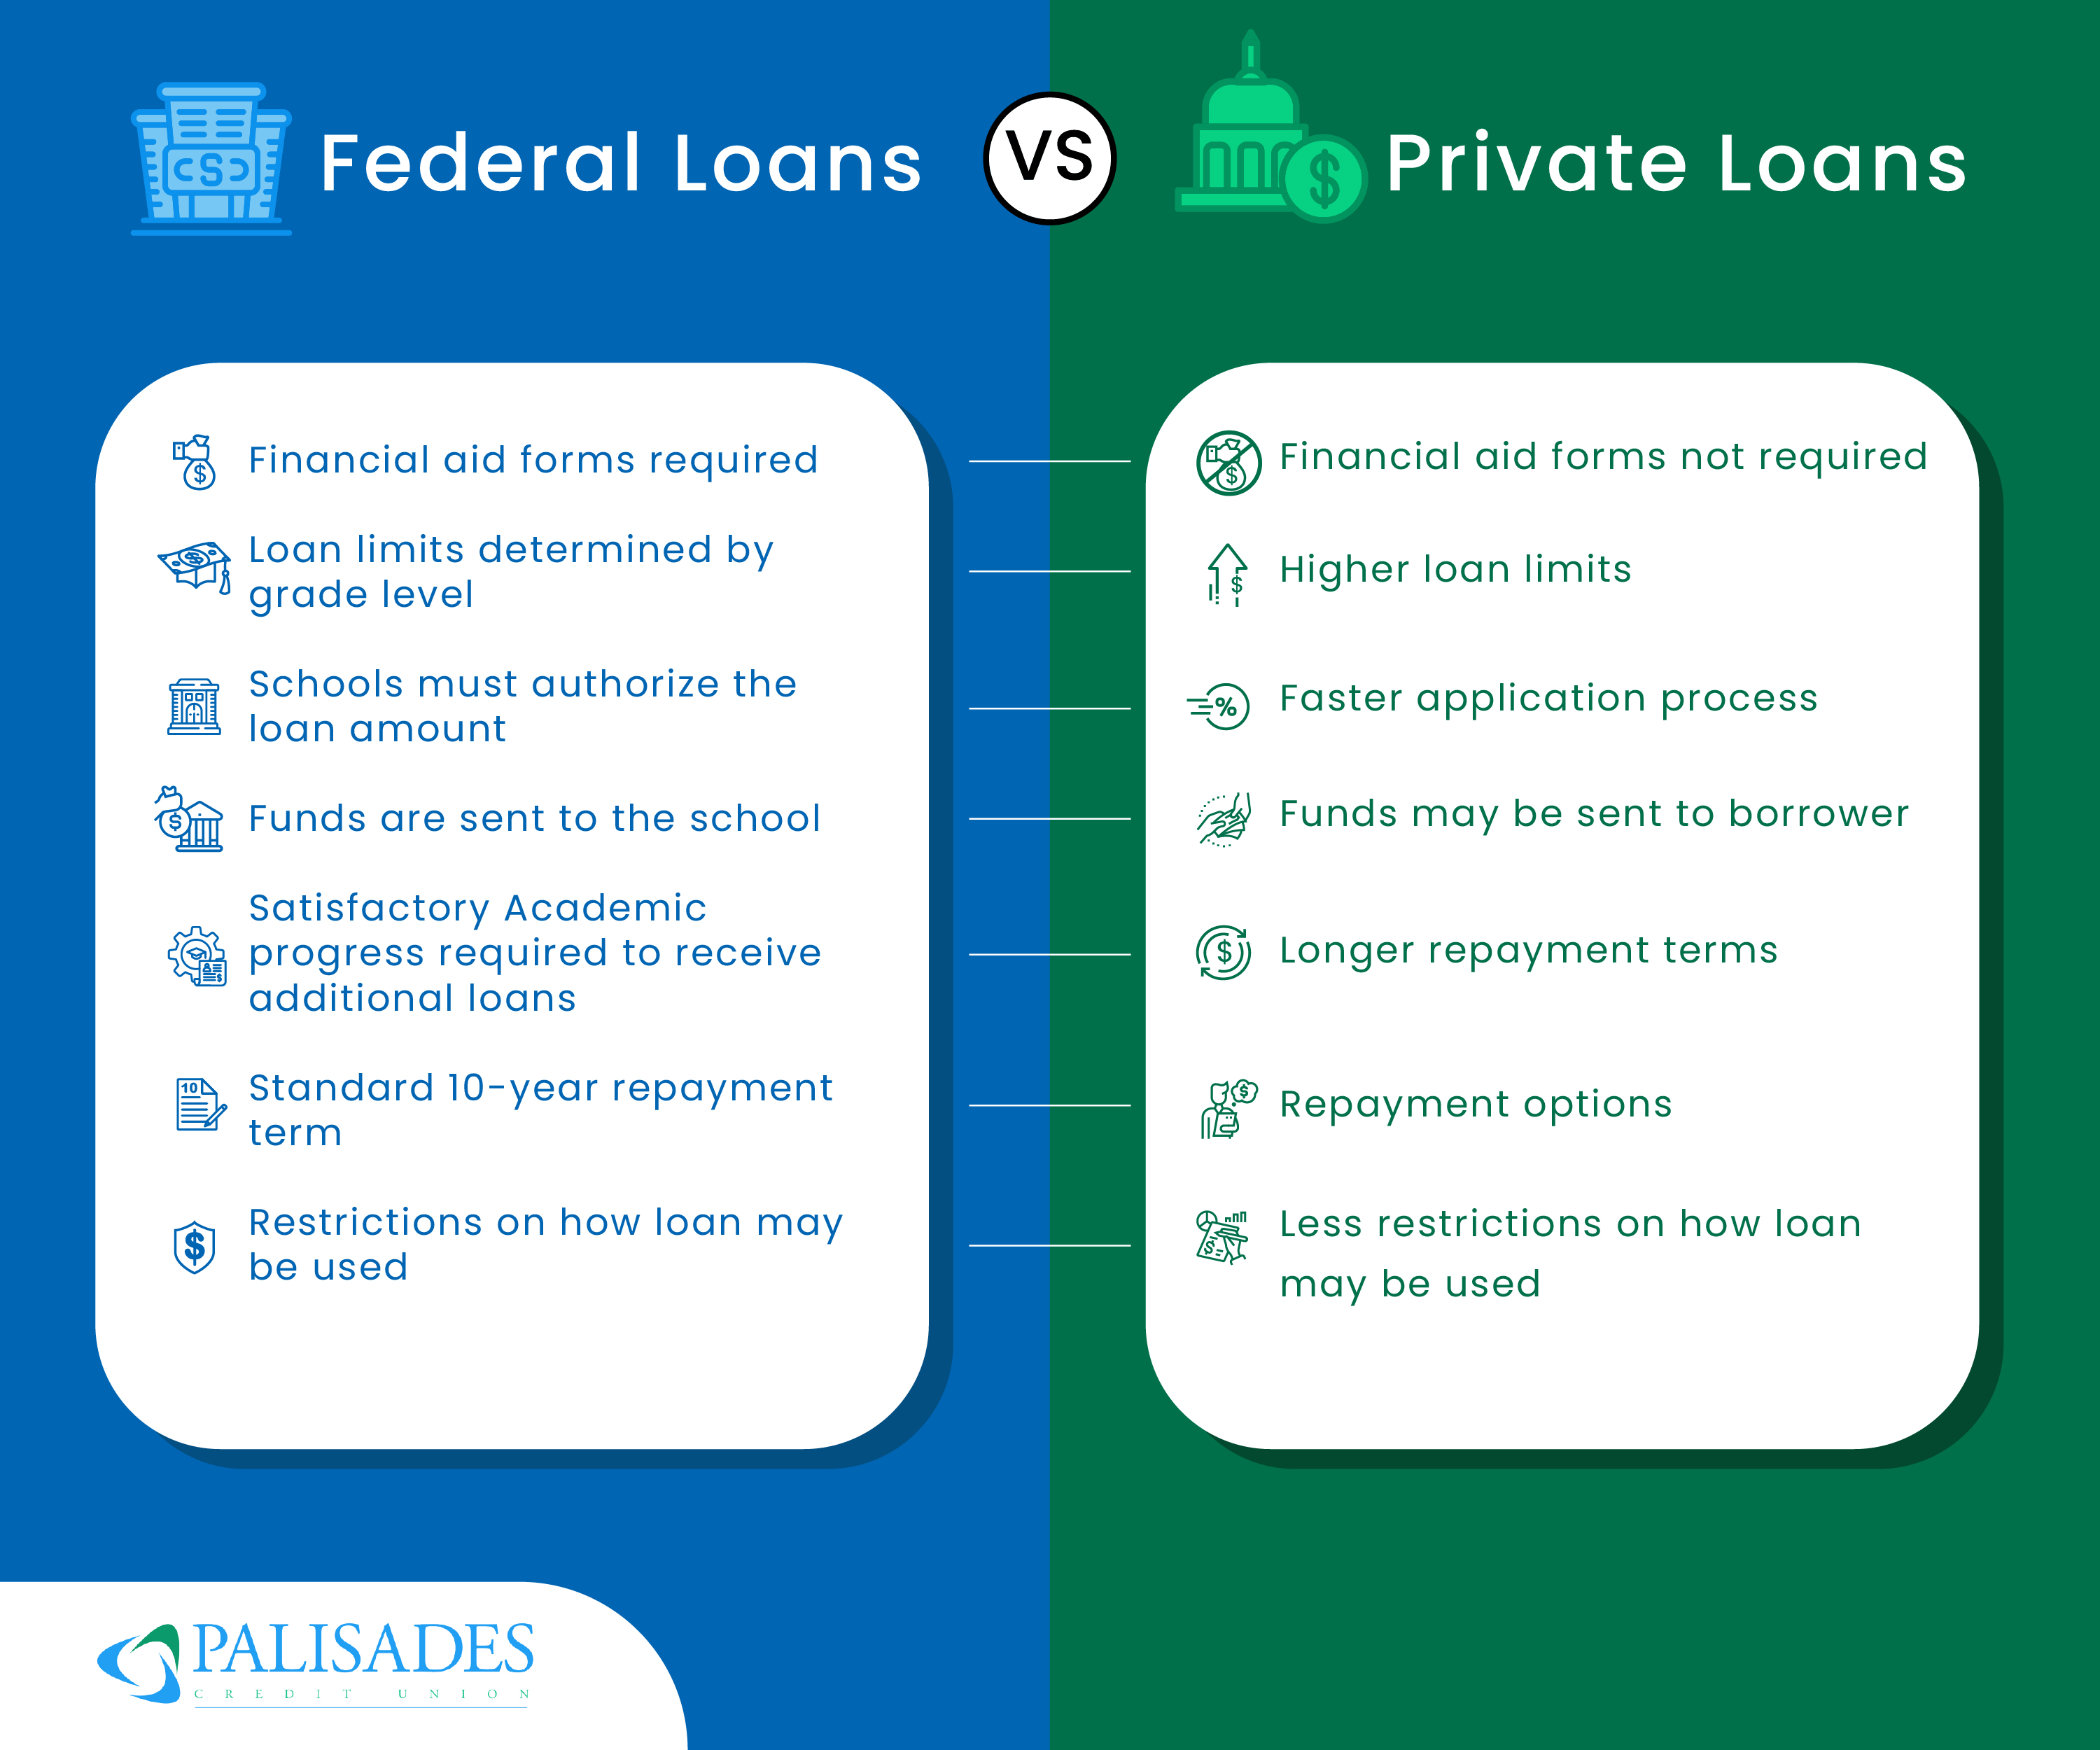 Federal vs. Private Student Loans    Federal Loans  • Financial aid forms required  • Loan limits determined by grade level  • Schools must authorize the loan amount  • Funds are sent to the school  • Satisfactory Academic progress required to receive additional loans  • Standard 10-year repayment term  • Restrictions on how loan may be used    Private Loans  • Financial aid forms not required  • Higher loan limits  • Faster application process  • Funds may be sent to borrower  • Longer repayment terms  • Repayment options  • Less restrictions on how loan may be used 